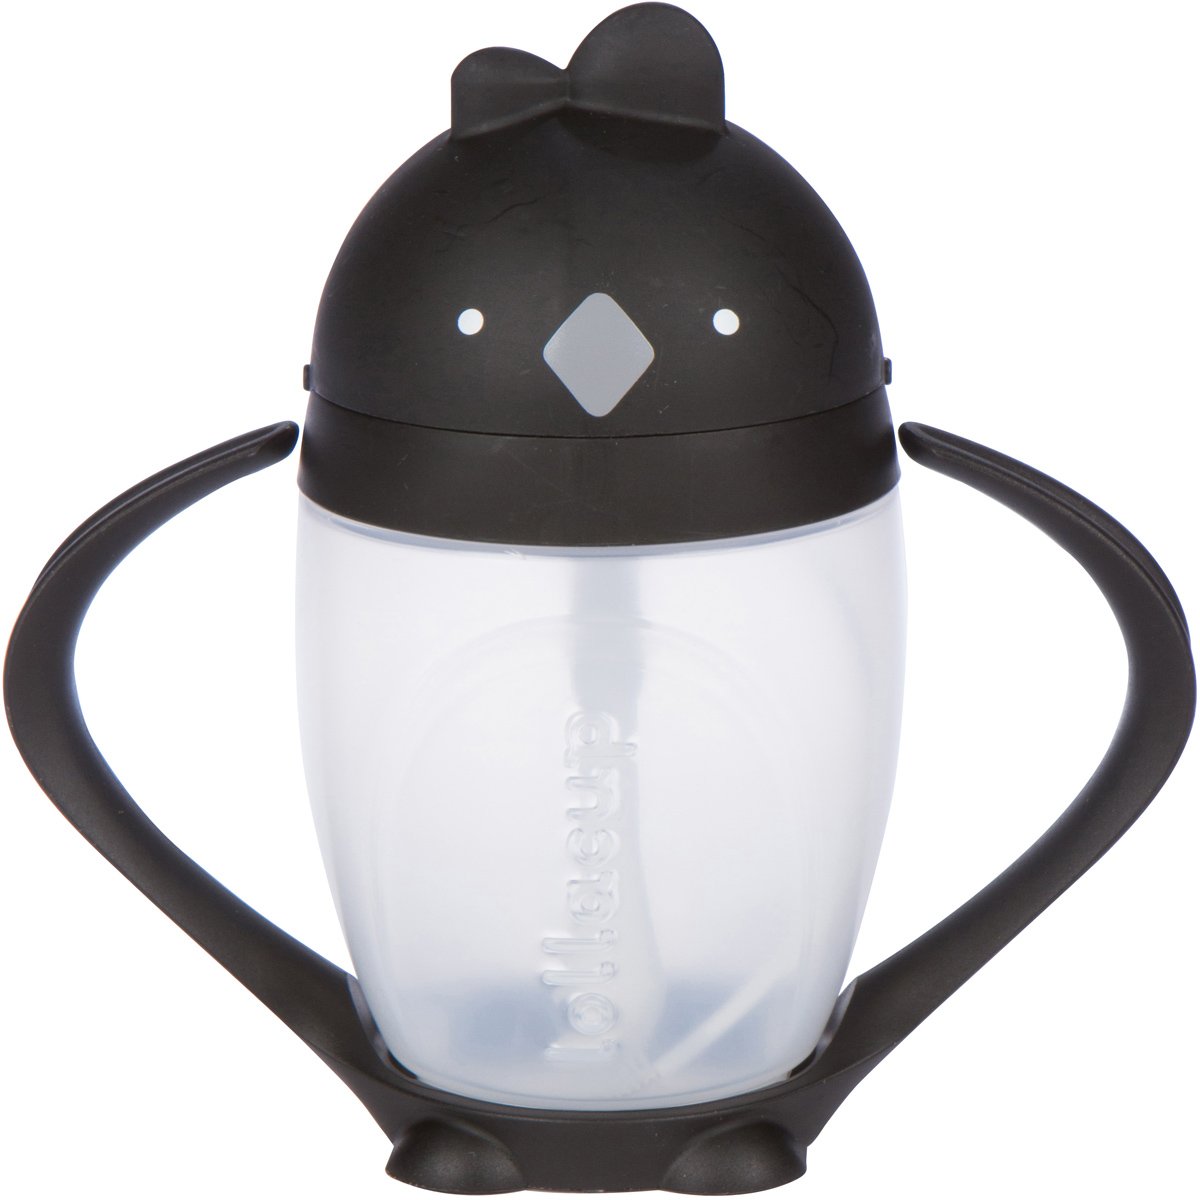 Best Sippy Cups for Toddlers